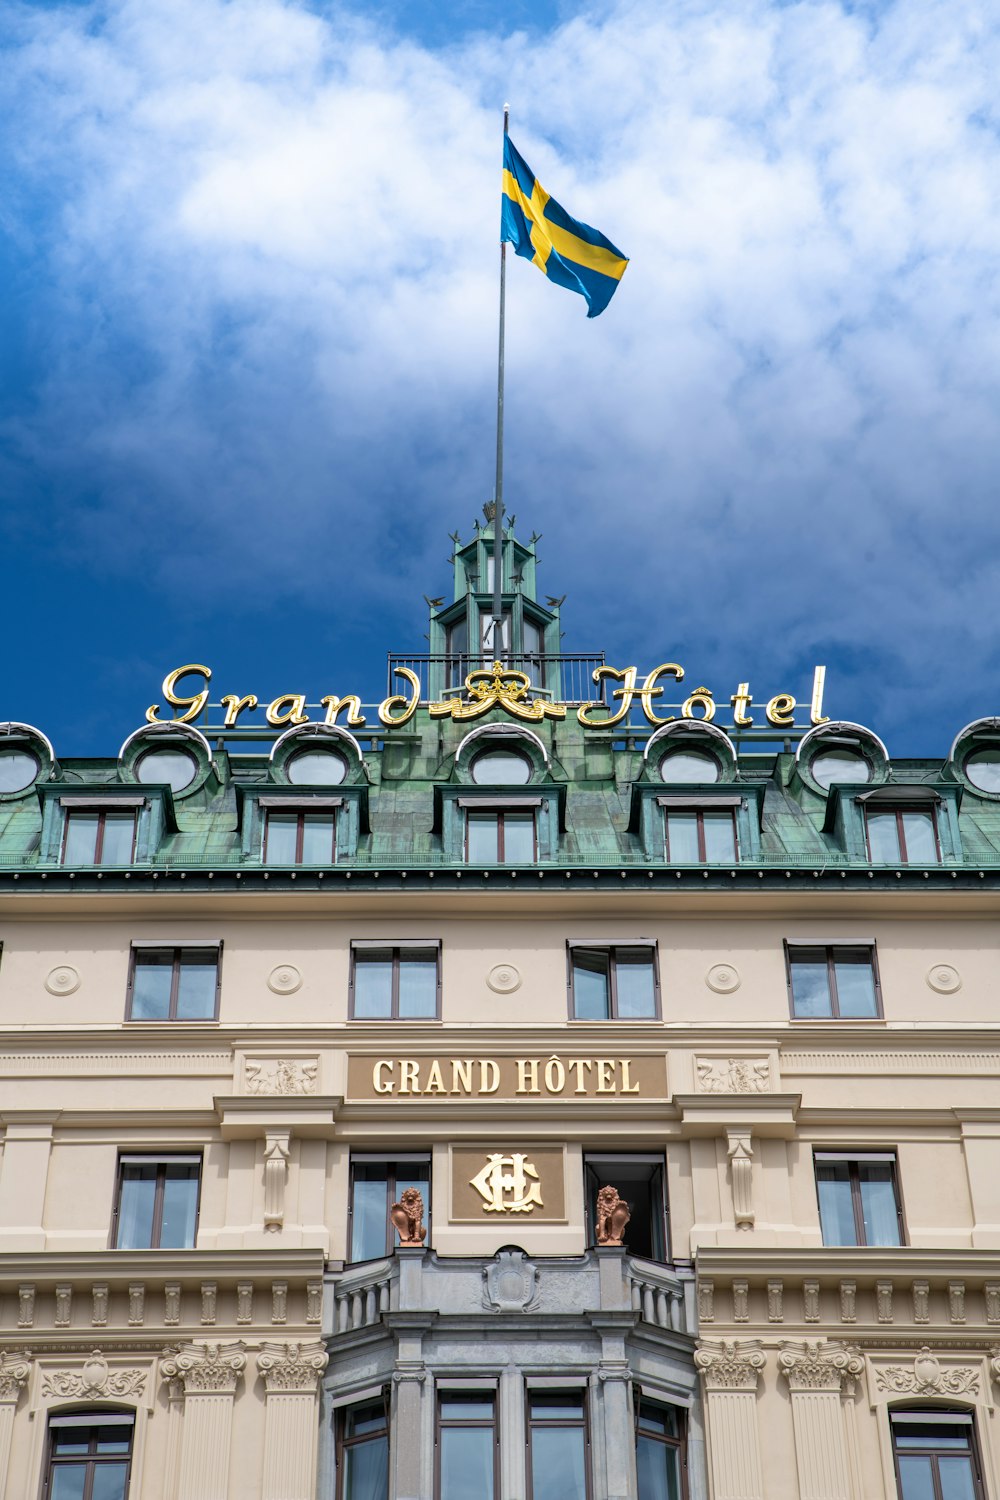 Sweden flag on top of pole on the roof of Grand Hotel building during day